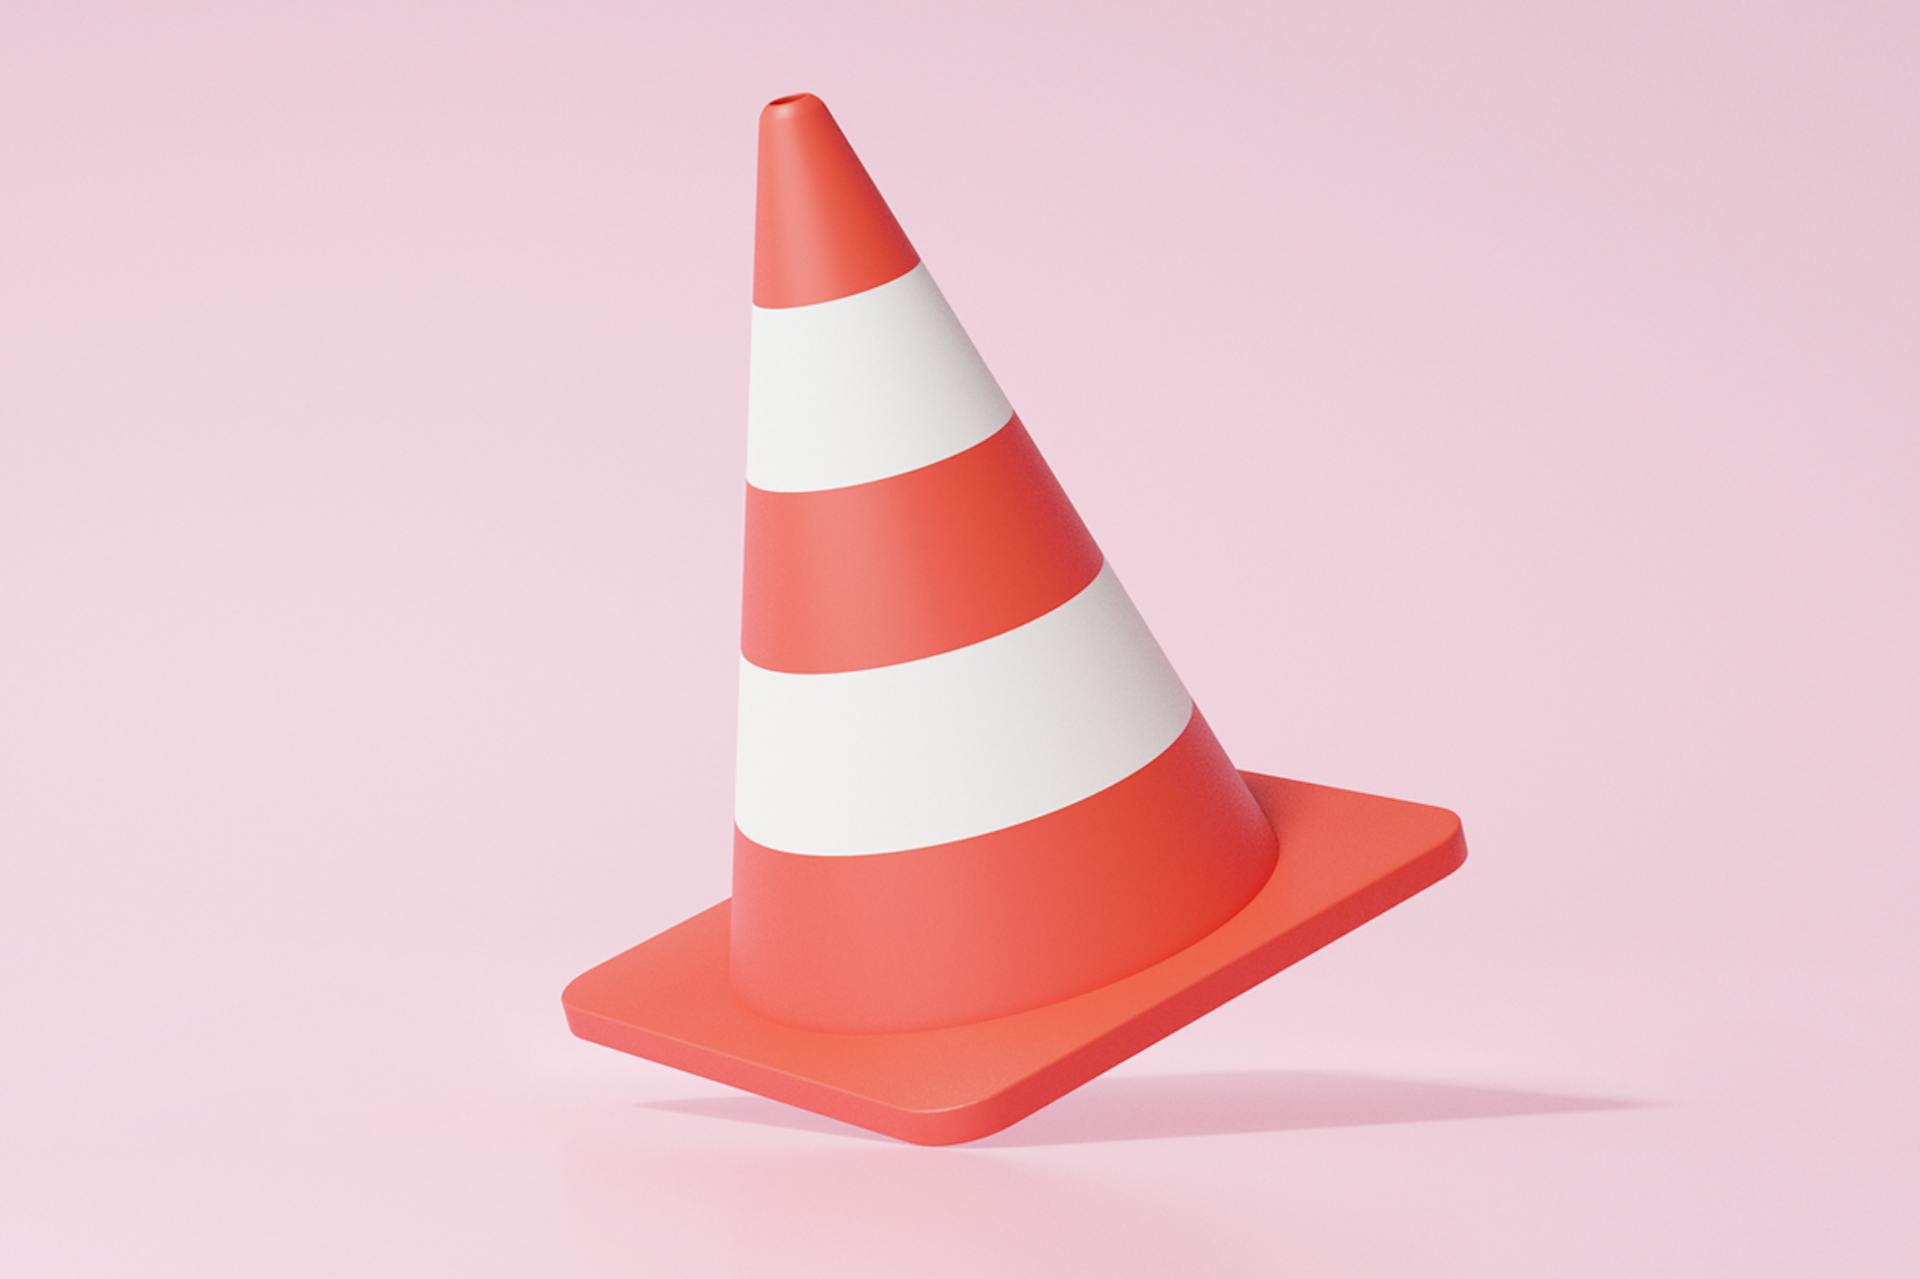 An illustration of a red traffic cone that has two white stripes on it. A traffic cone, like this, often acts as a warning signal, which it is being used as the header image for a blog on Barriers to Effective Communication & How to Overcome Them.